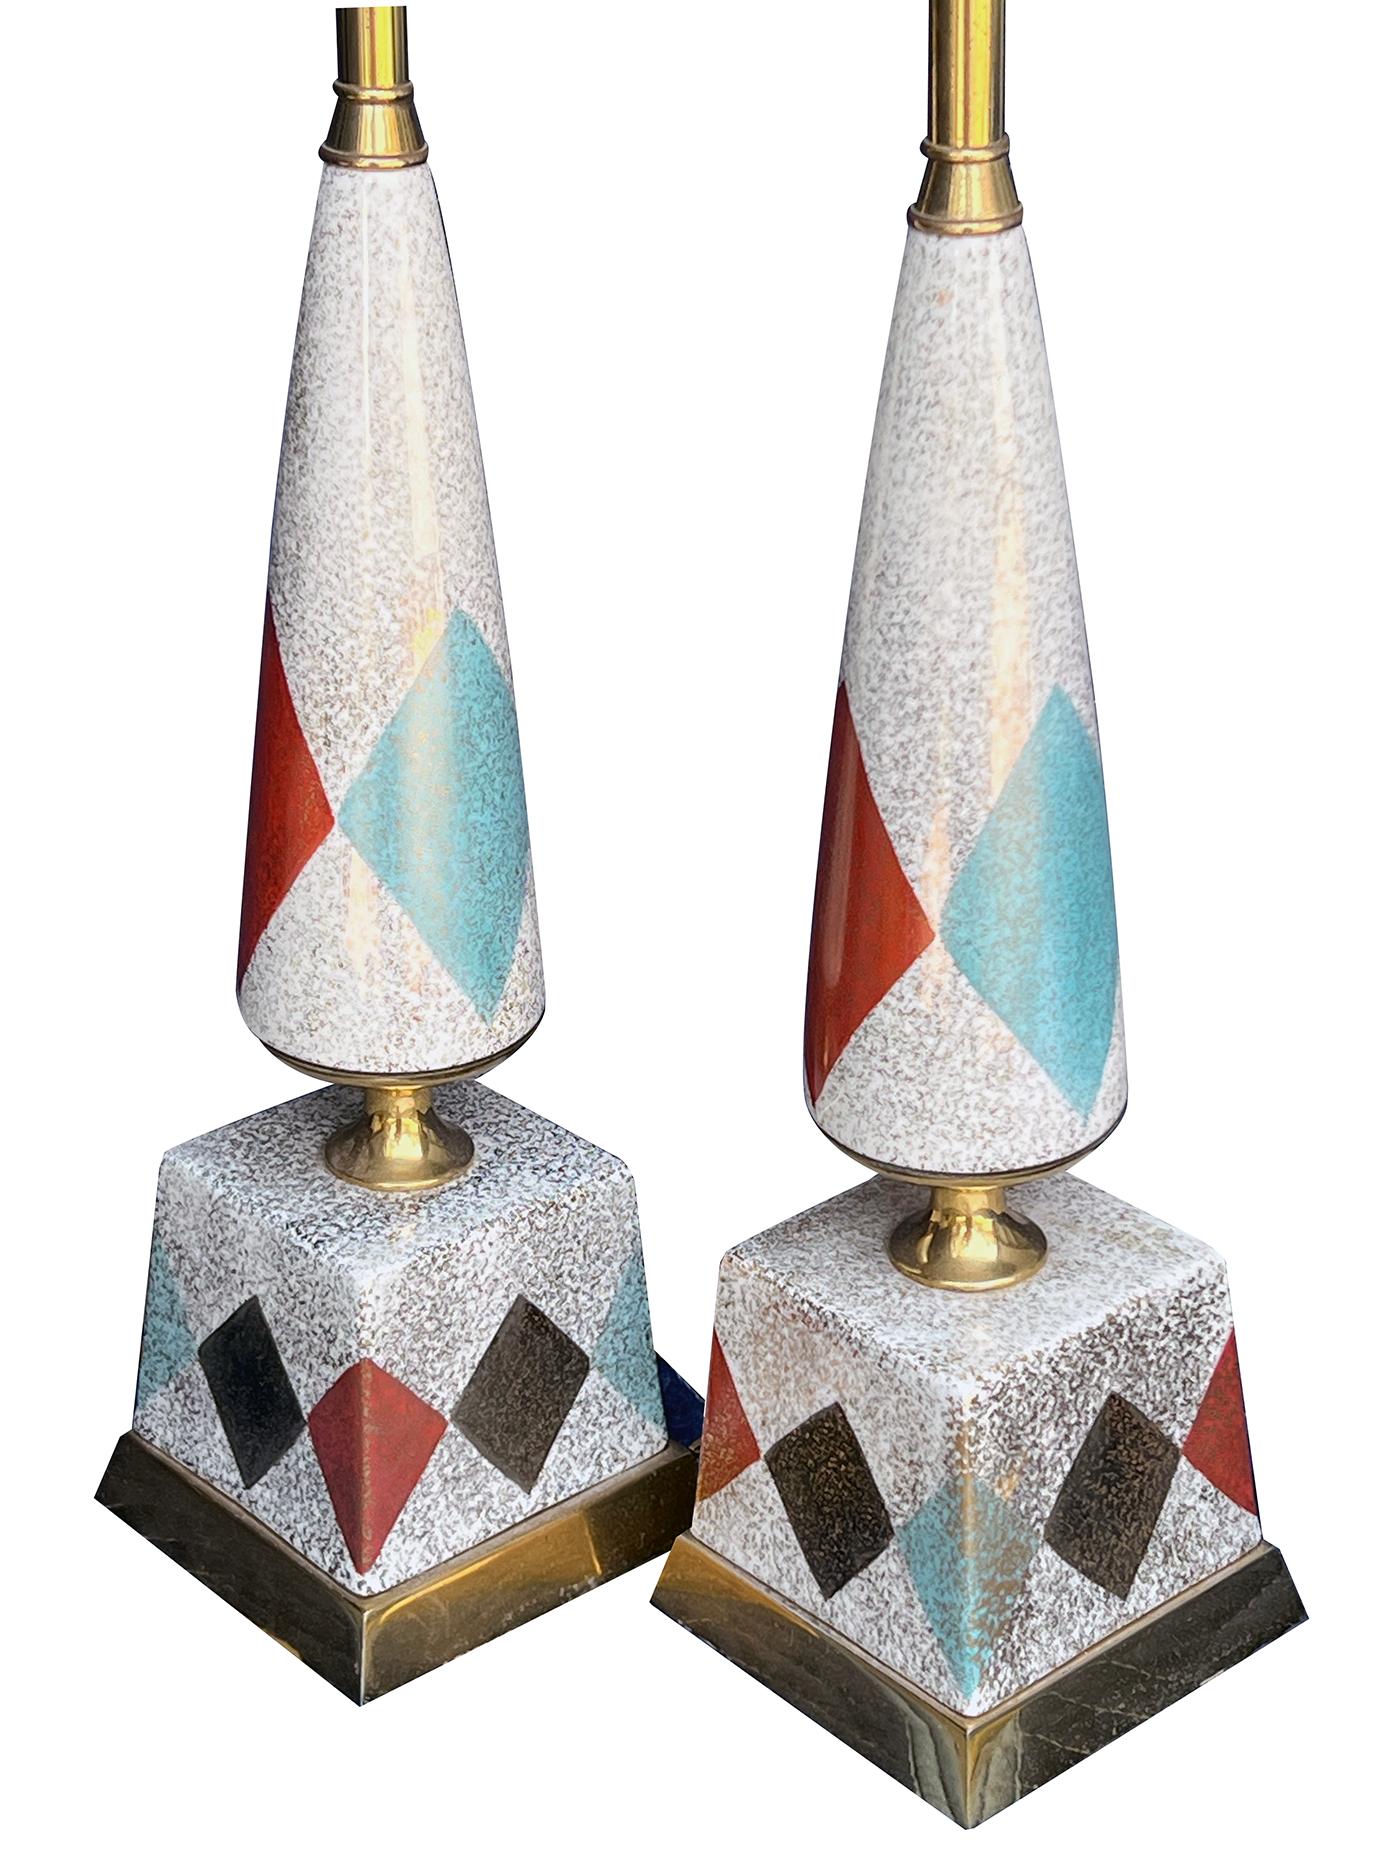 each with brass fittings and of conical form above a square plinth with harlequin pattern of vertically arranged contrasting diamonds all on an ivory ground with gilt flecking; height: 14.5